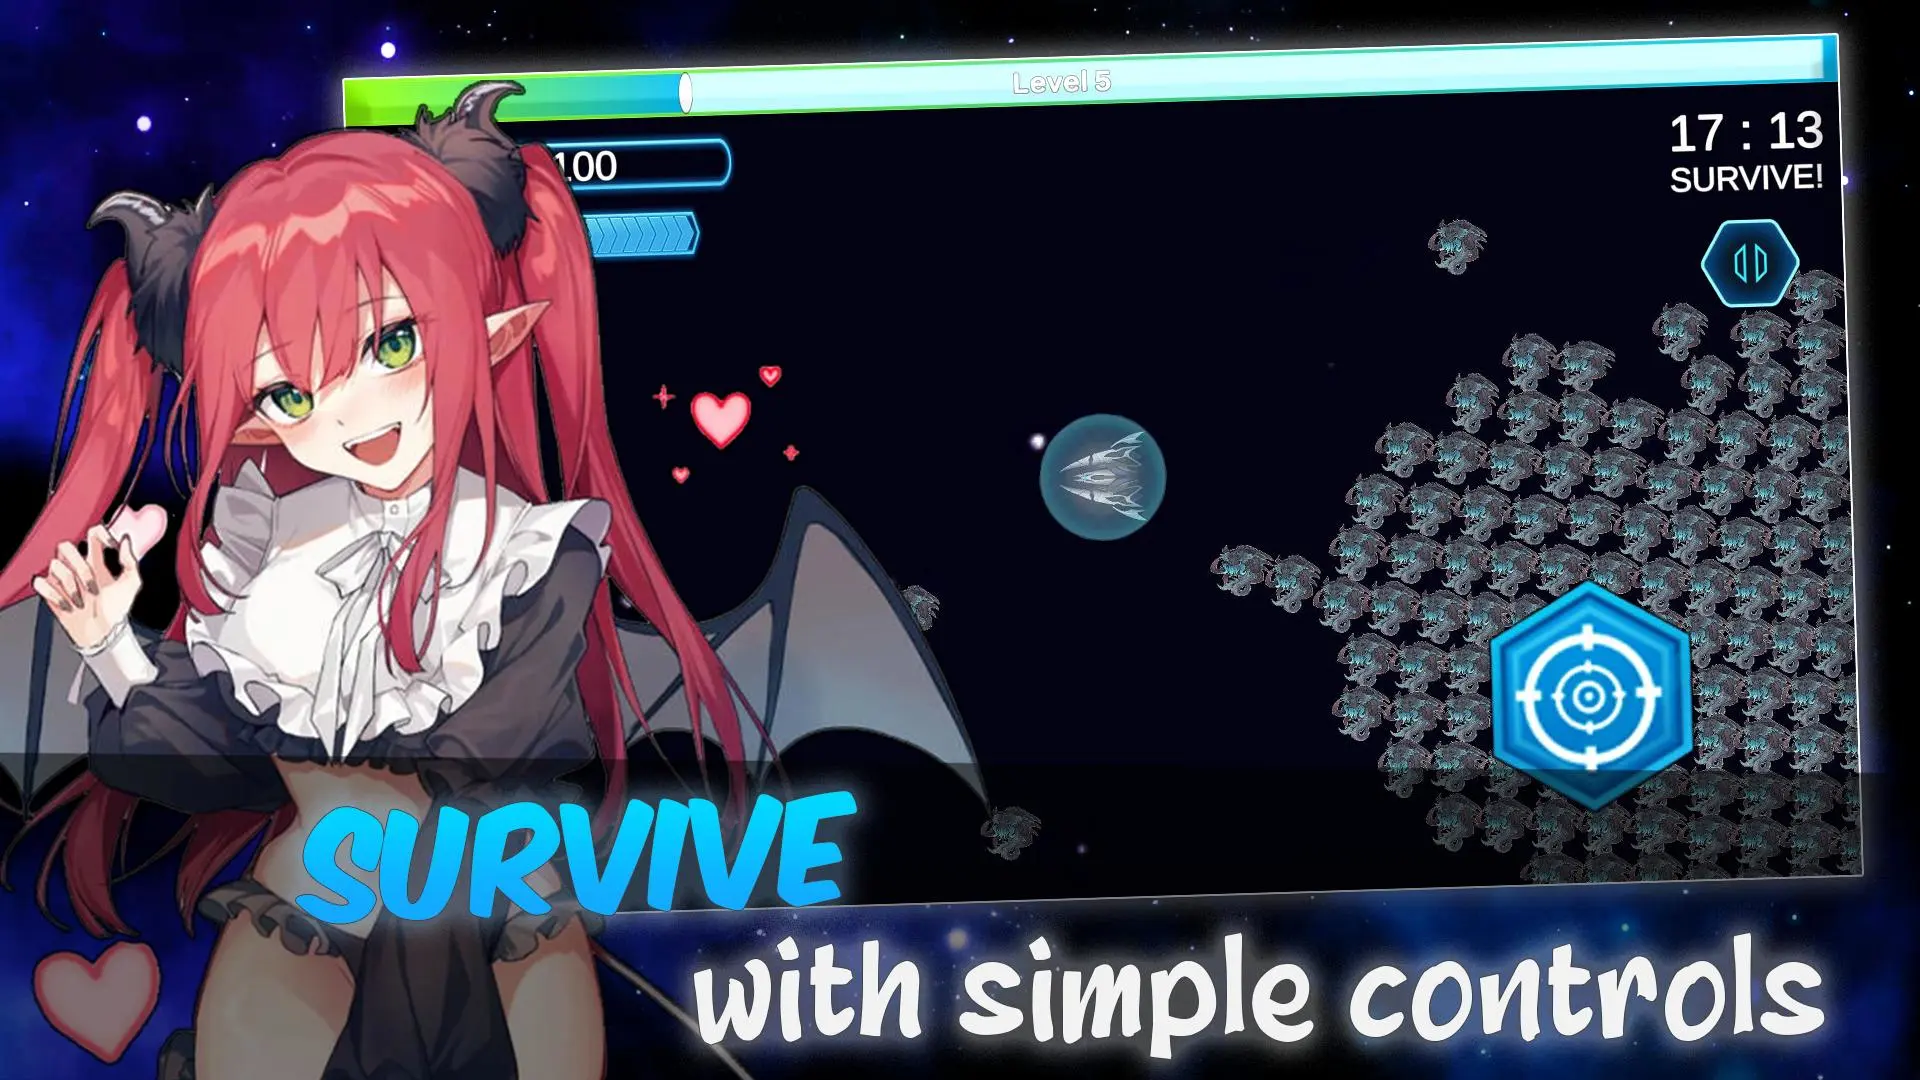 Anime The Multiverse War Mod Gameplay Android 